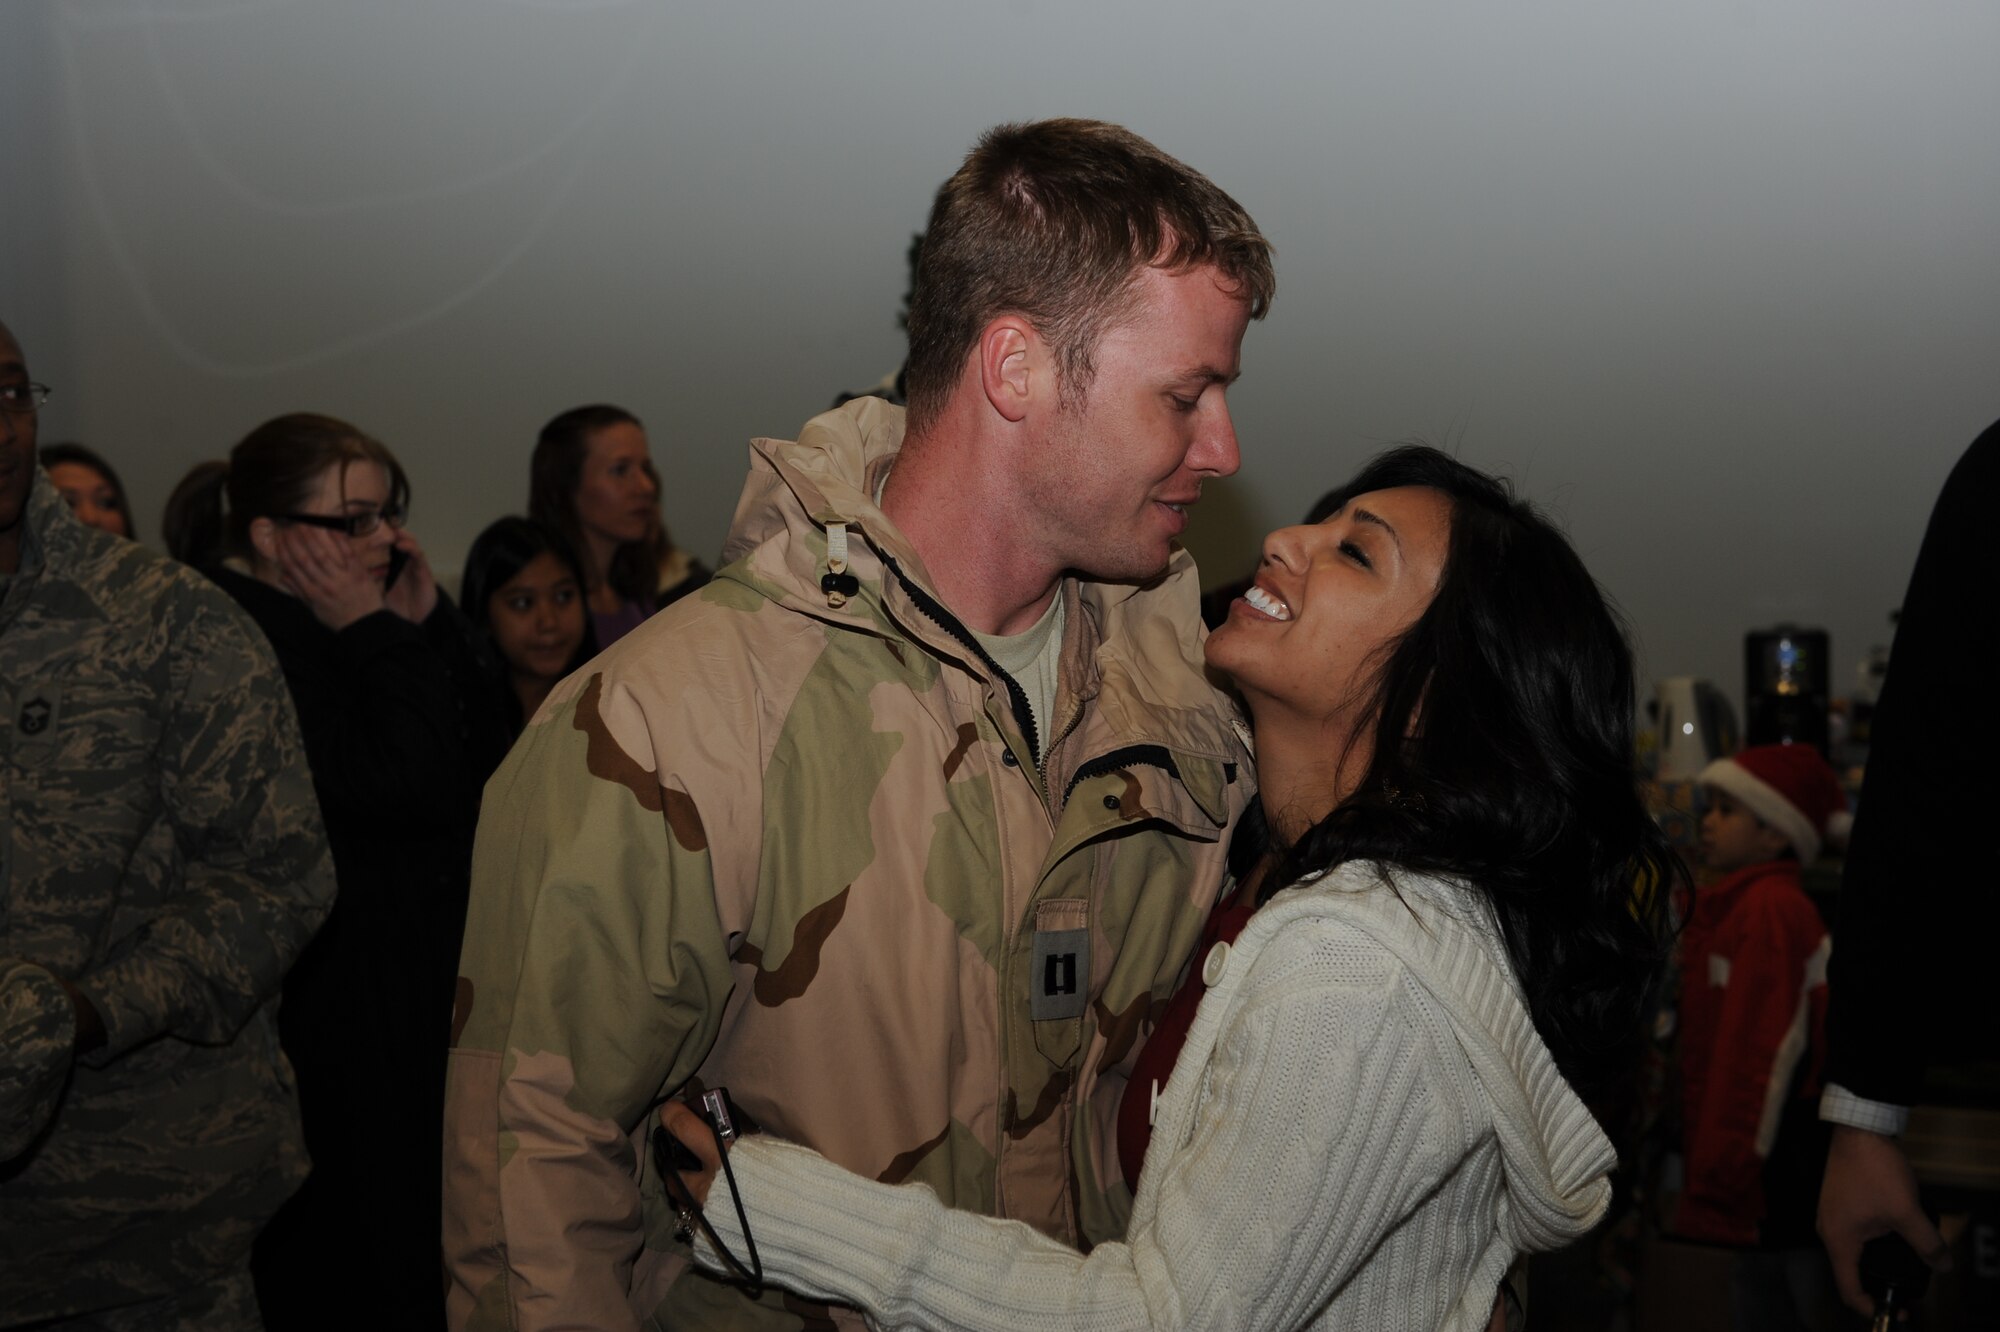 Capt. Jason Robinson, a 53rd Airlift Squadron pilot, is greeted on his return from deployment by his wife, Mary Ann, Dec. 25 at Building 430. The Captain was one of nearly 160 who returned home Christmas Day. (U.S. Air Force photo by Senior Airman Ethan Morgan)